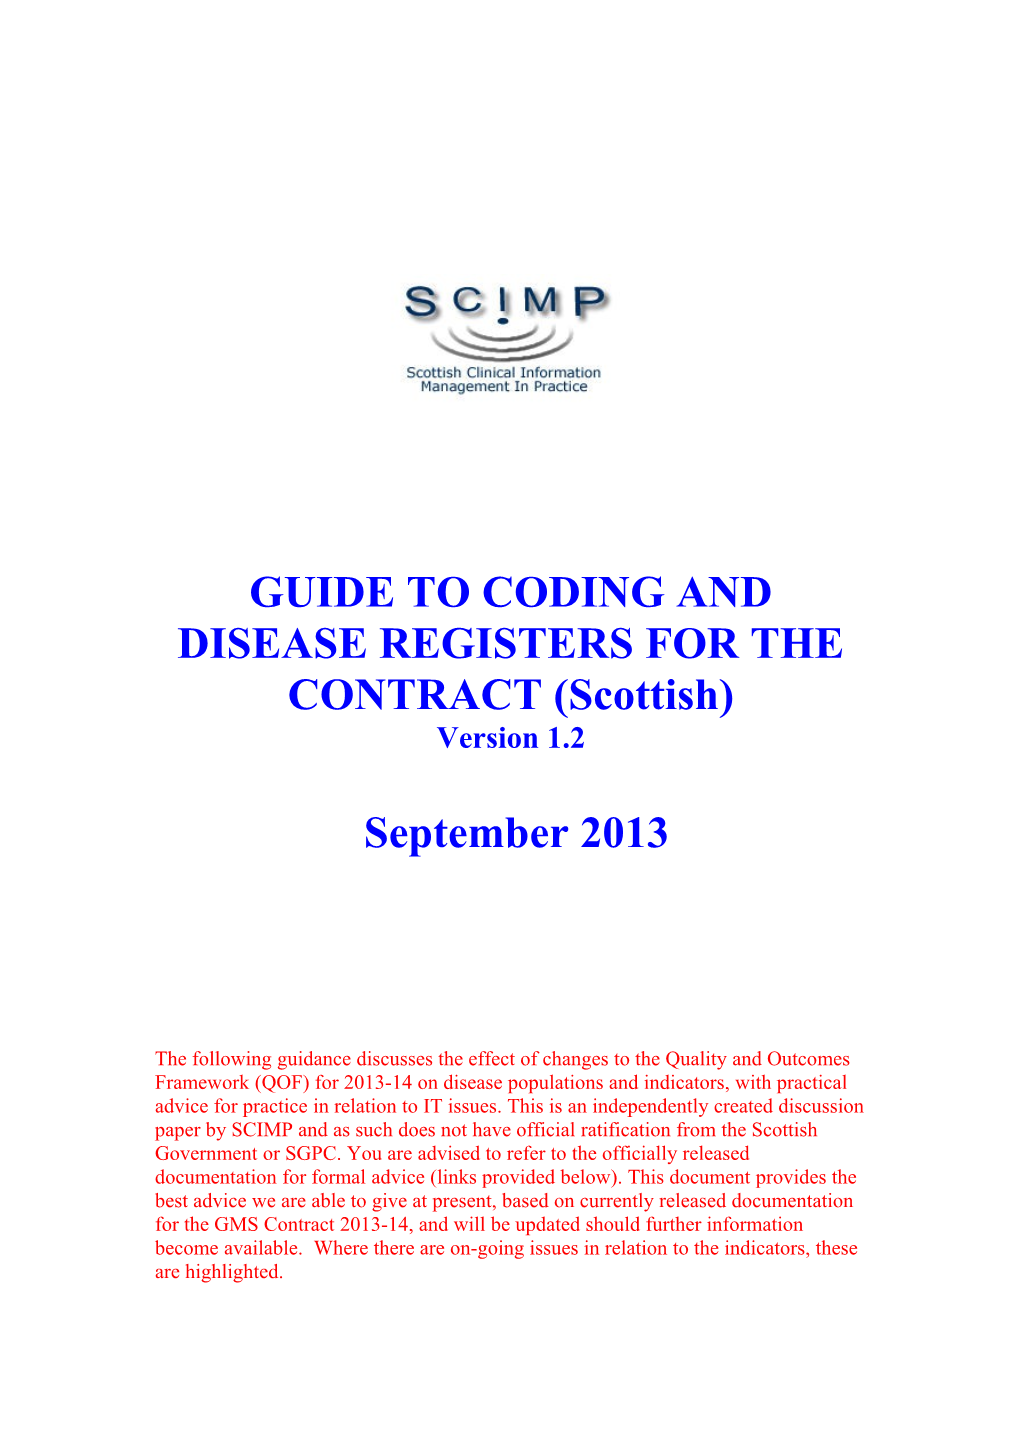 Scimp Guide to Coding and Disease Registers for the Contract 2006 07